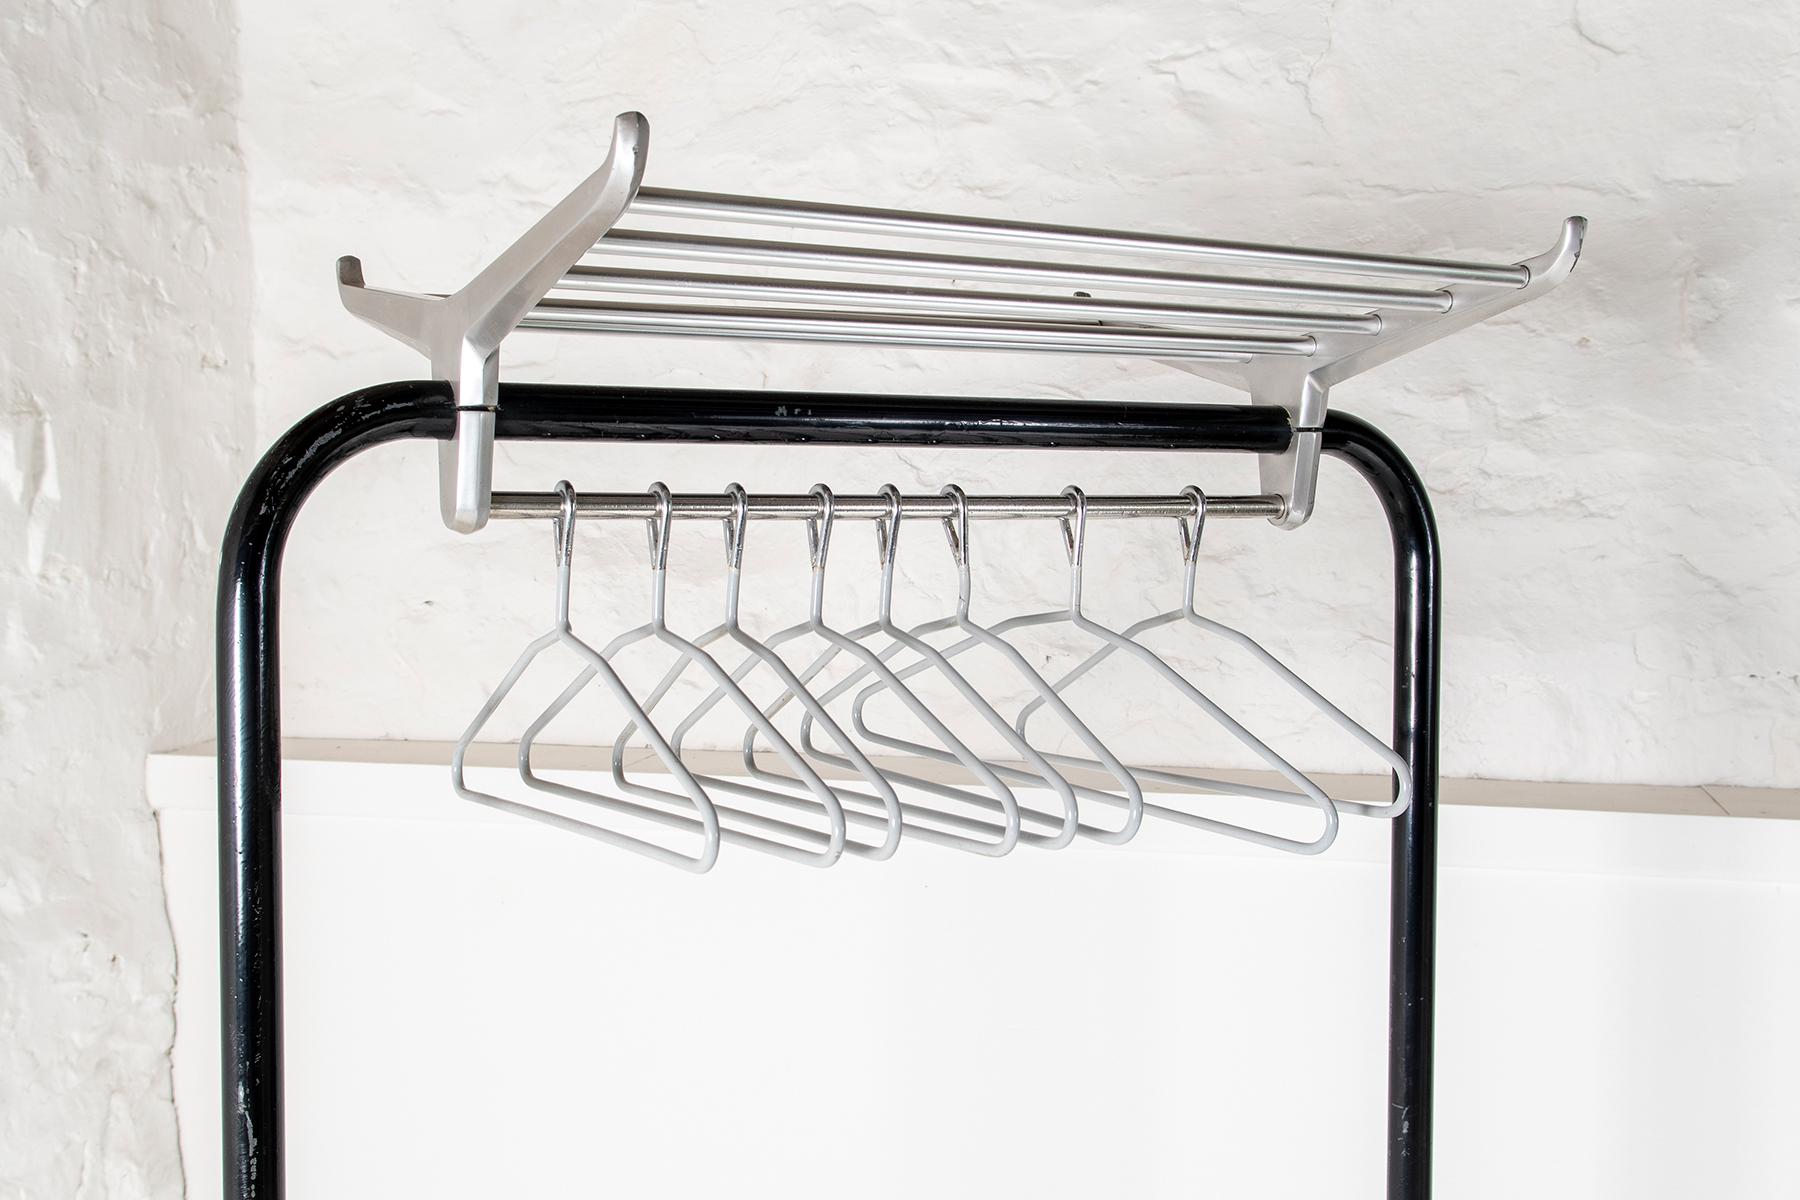 An original example in excellent order, black enamel coated frame with polished aluminium luggage rack. This example is a nice handy size and will fit most Cloakrooms or Hallways.
Retains all its original parts, including the umbrella holders each